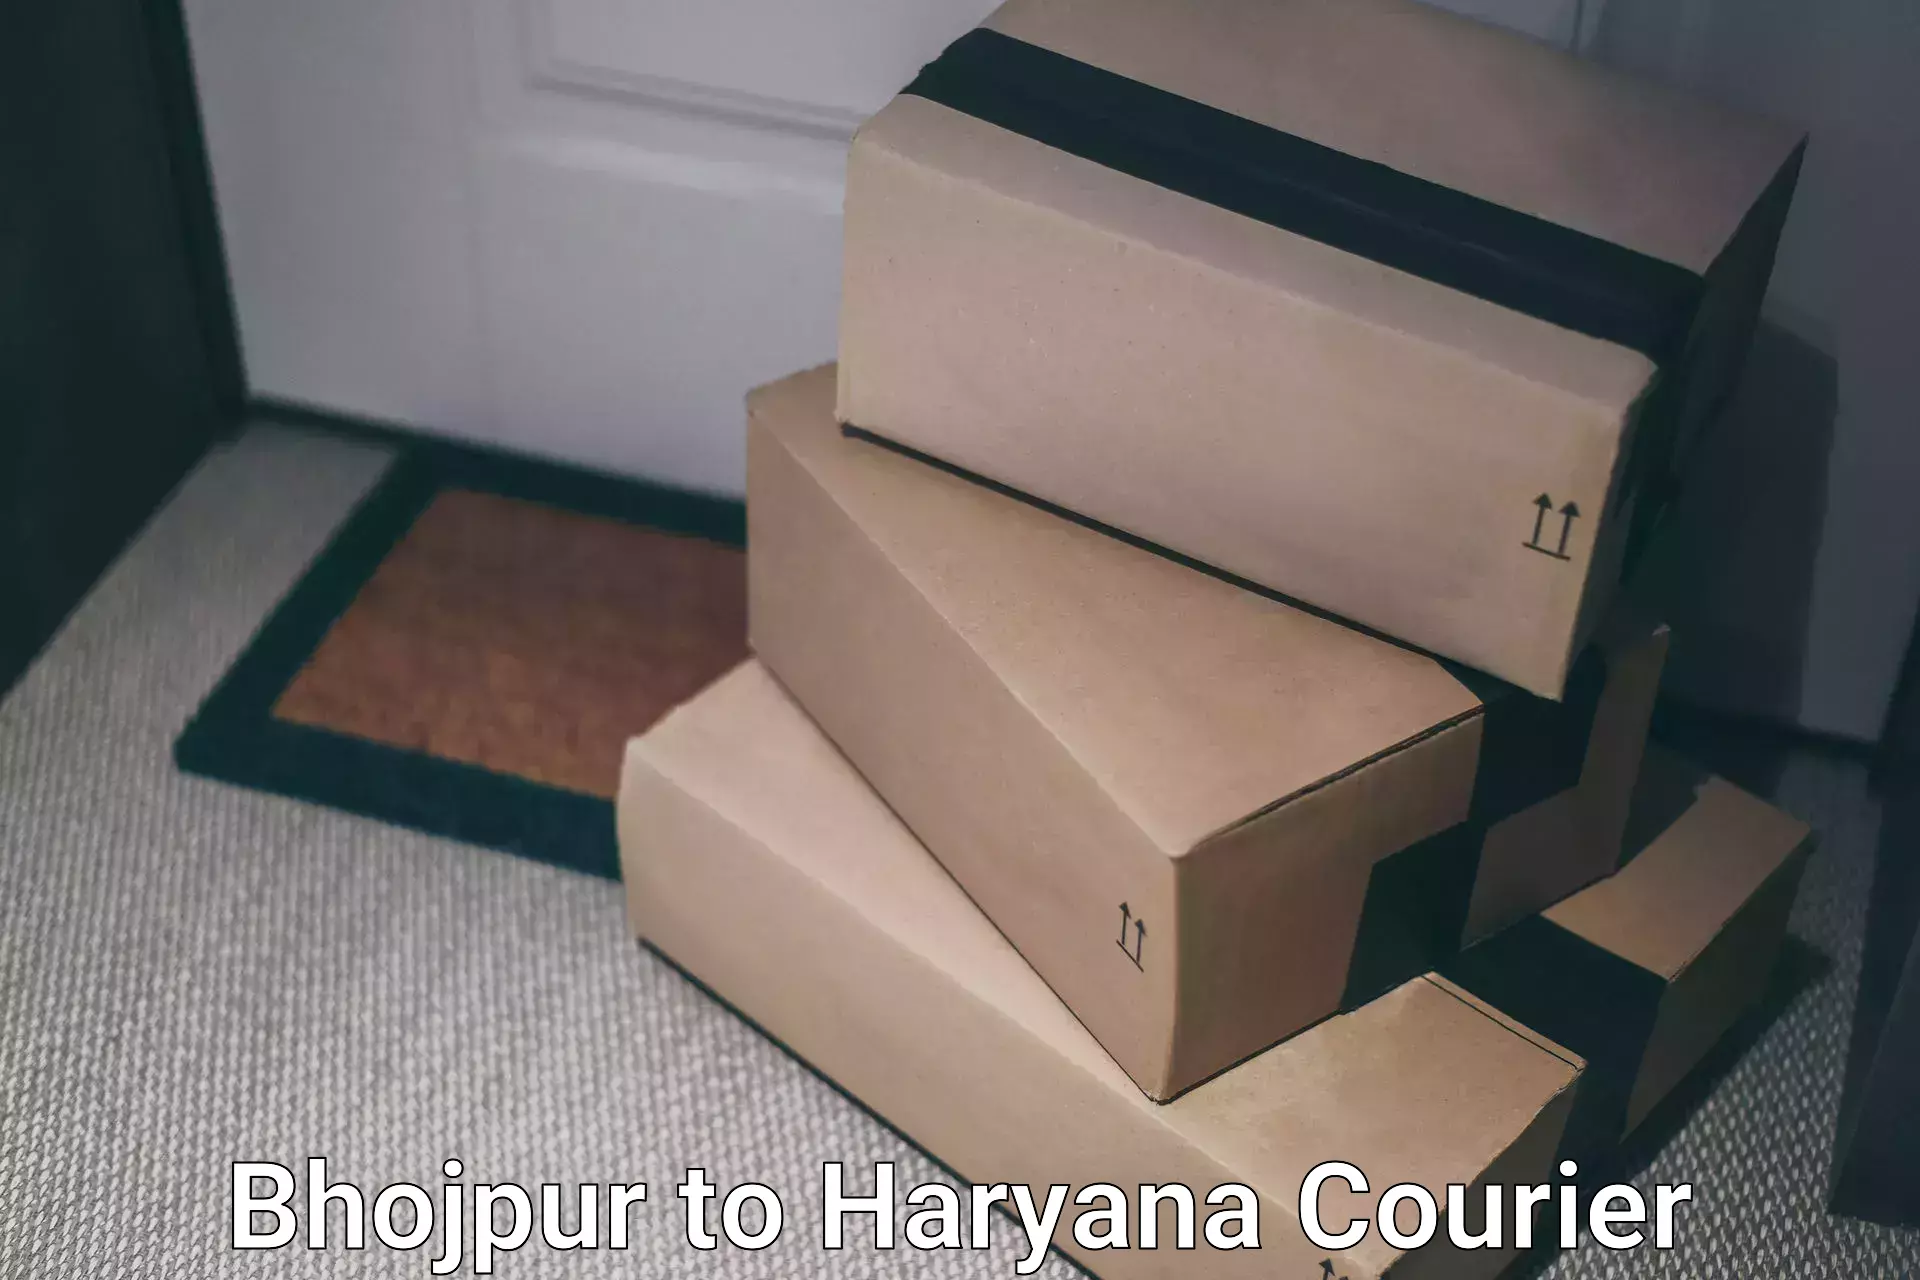 Courier service comparison Bhojpur to Bhiwani